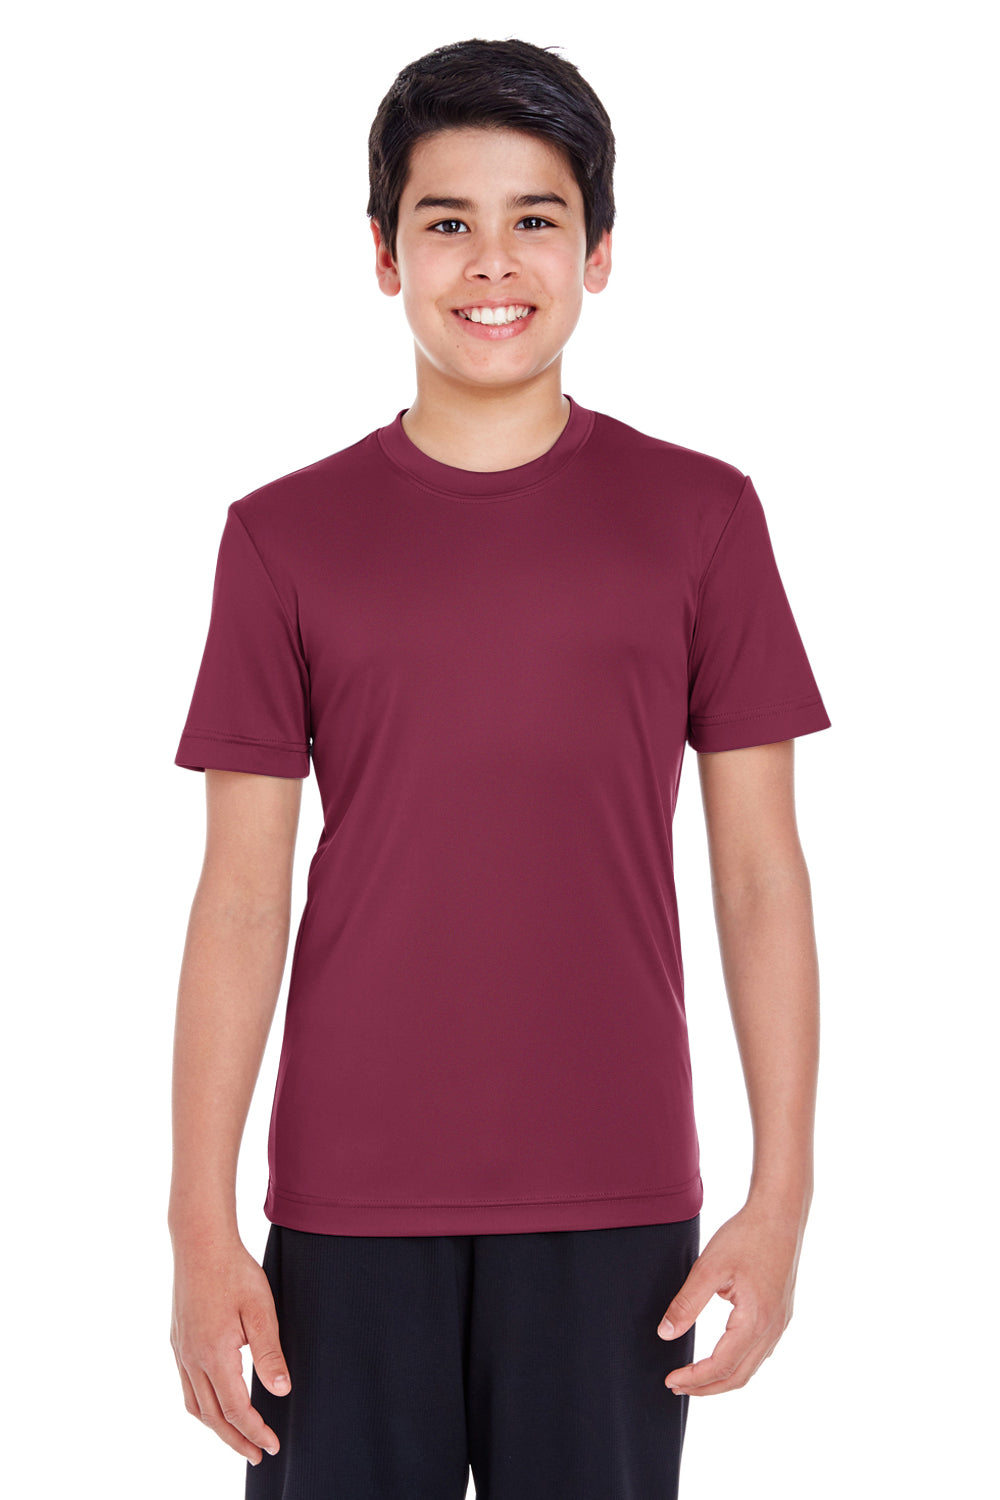 Team 365 TT11Y Youth Zone Performance Moisture Wicking Short Sleeve Crewneck T-Shirt Maroon Front